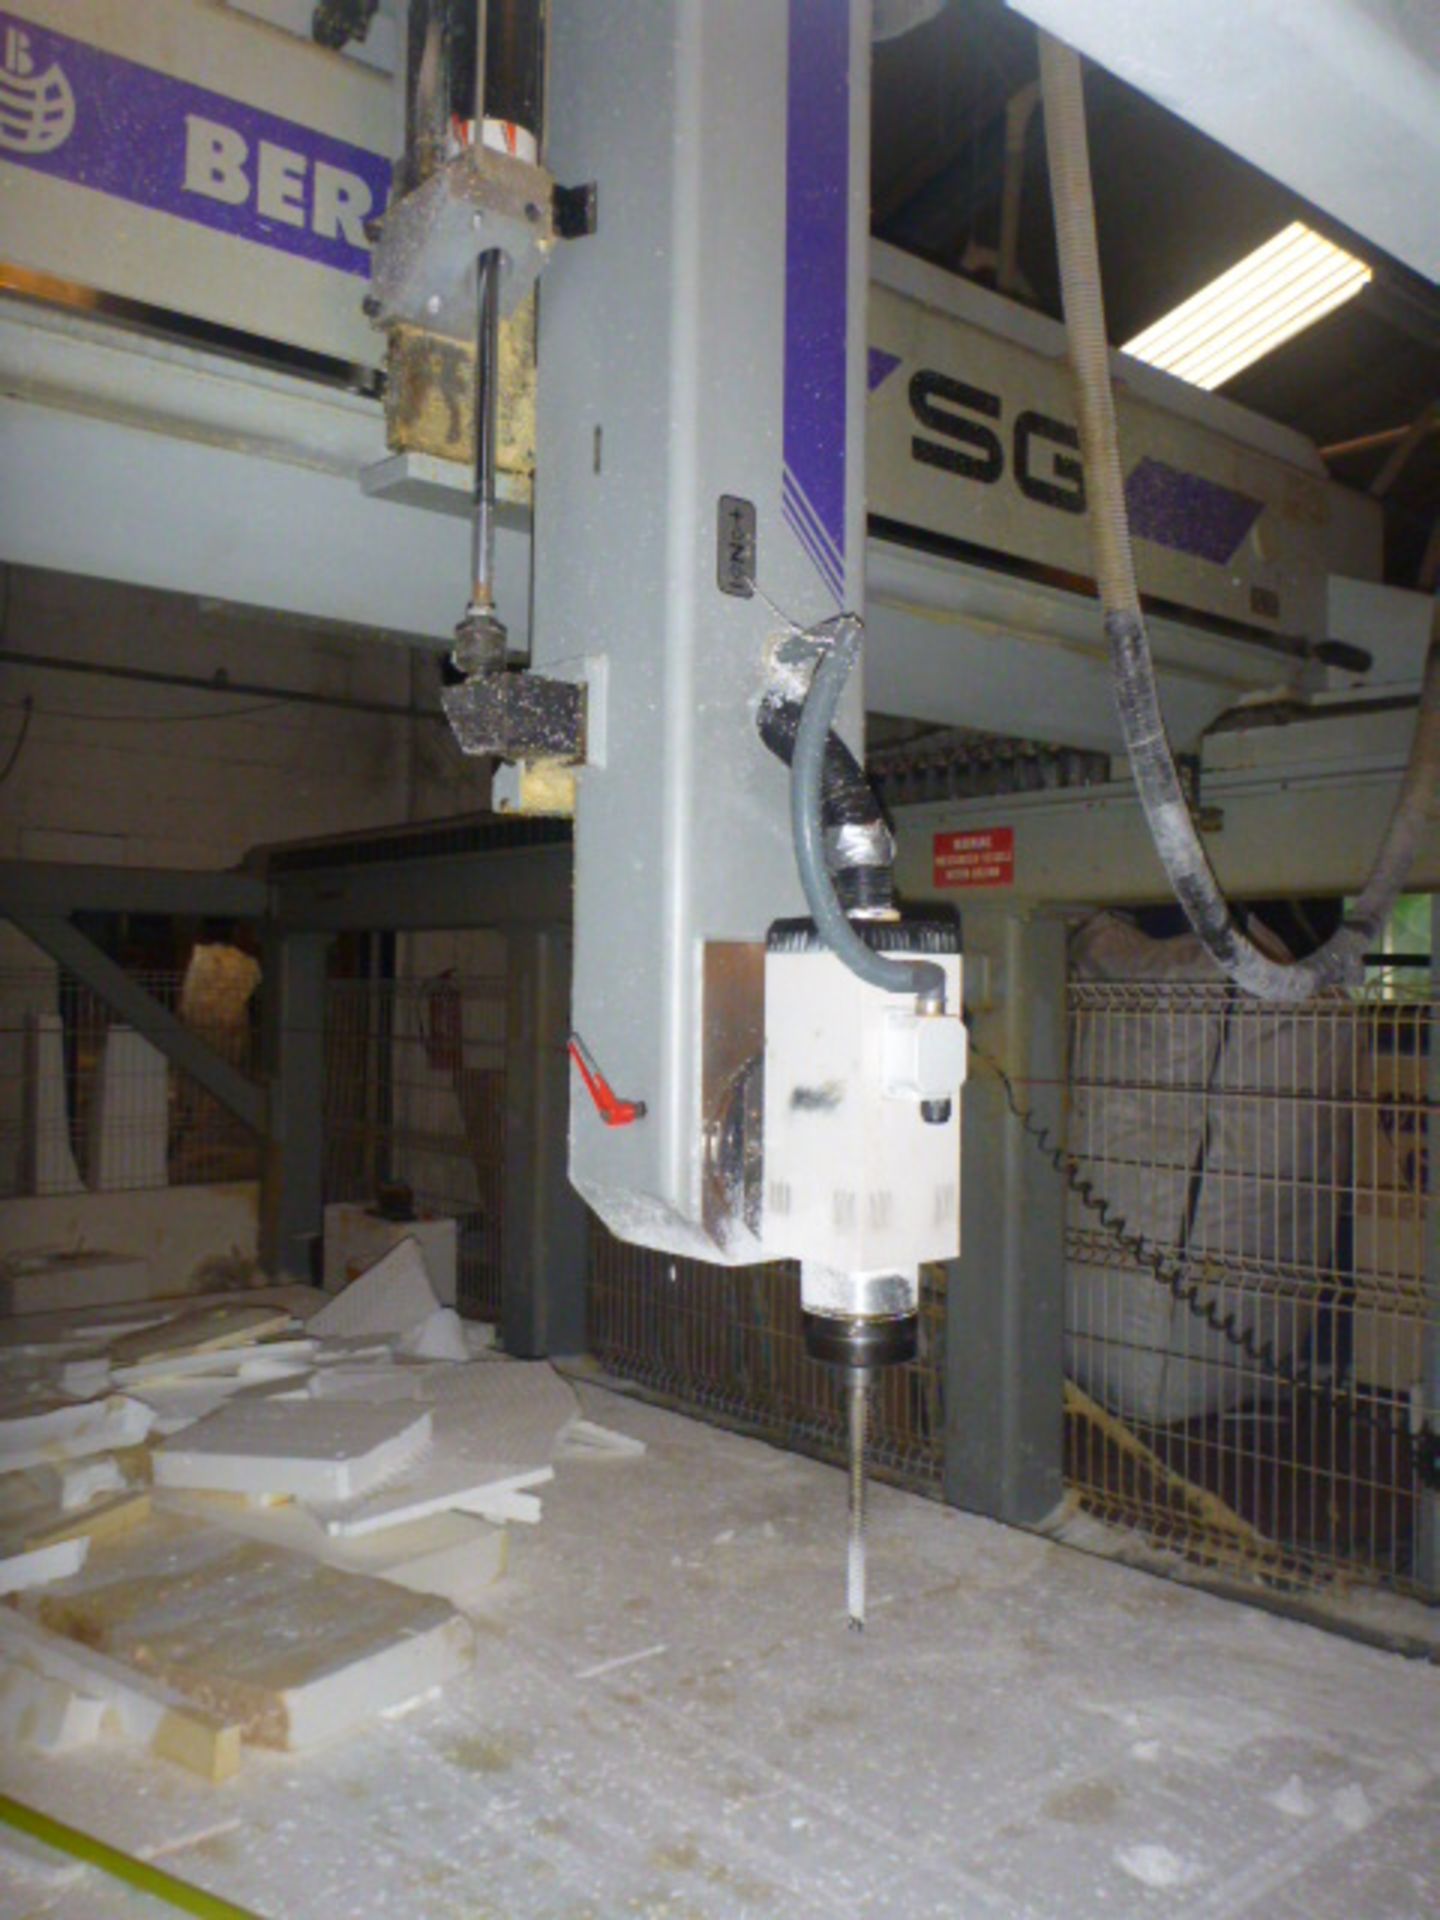 Bermaq SG Gantry 3+2 Axis Router/Carver with Heidenhain iTNC 530 Controls. Serial No 161, Year 2002. - Image 9 of 11